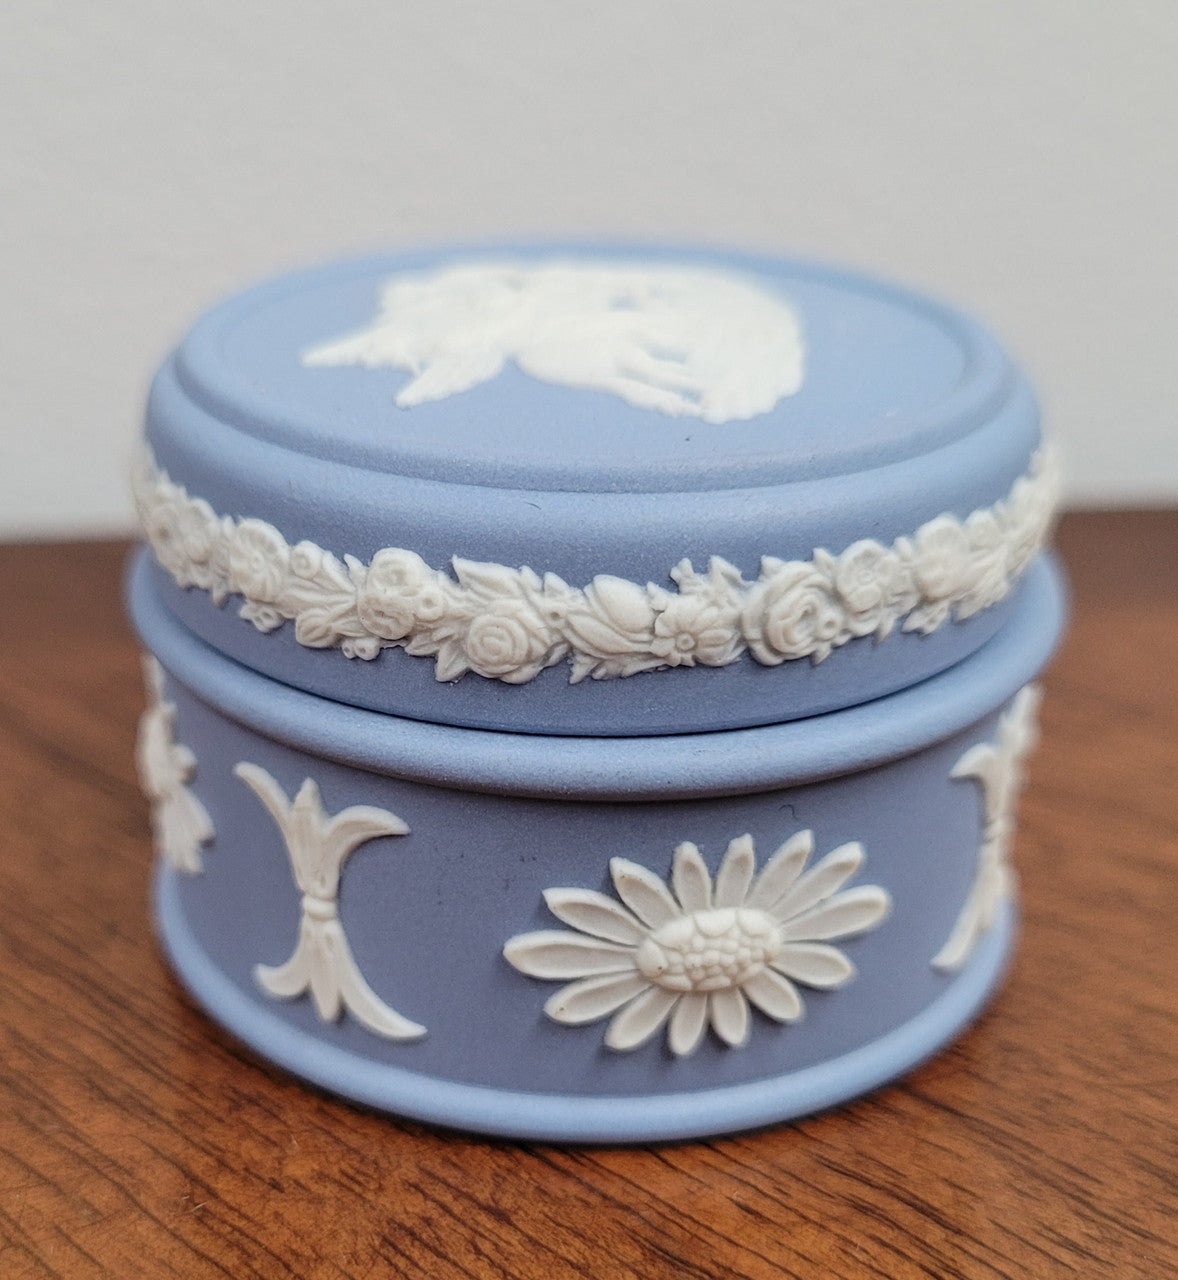 Wedgwood blue jasper trinket box. In good original condition with no chips or cracks.